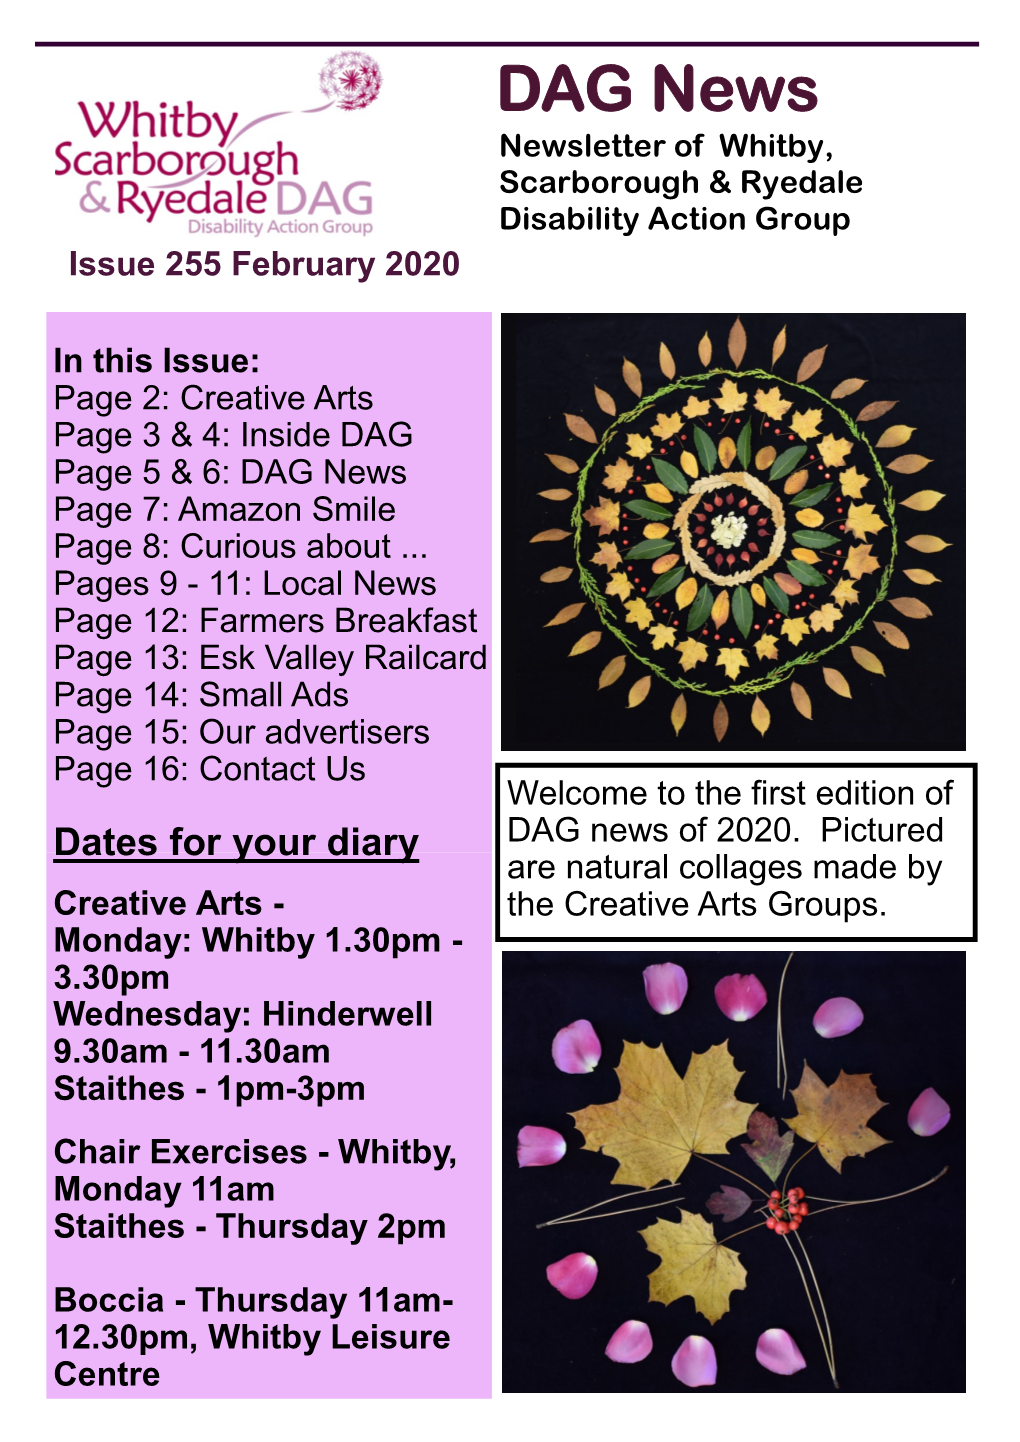 DAG News Newsletter of Whitby, Scarborough & Ryedale Disability Action Group Issue 255 February 2020